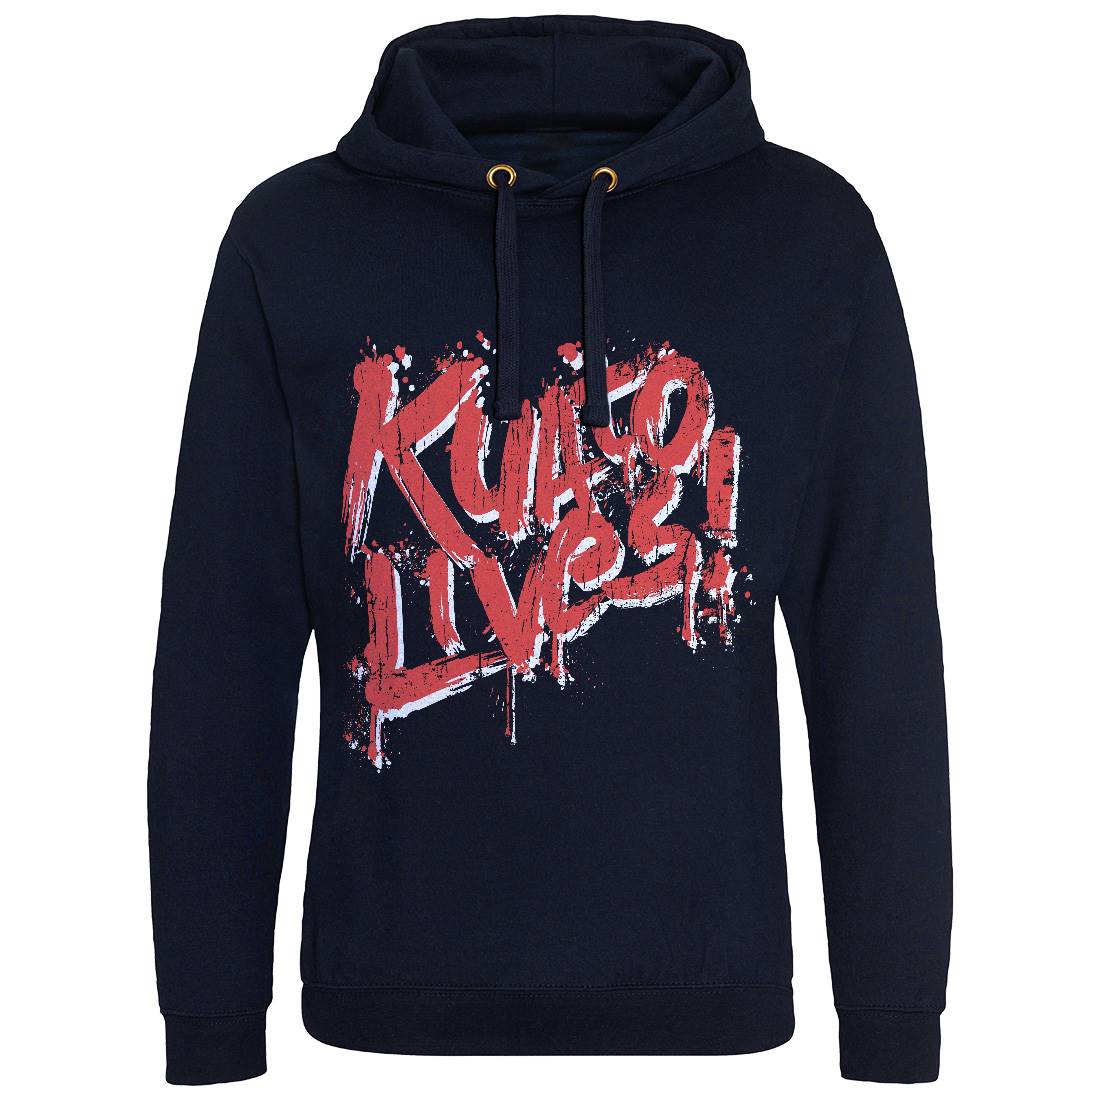 Kuato Lives Mens Hoodie Without Pocket Space D249